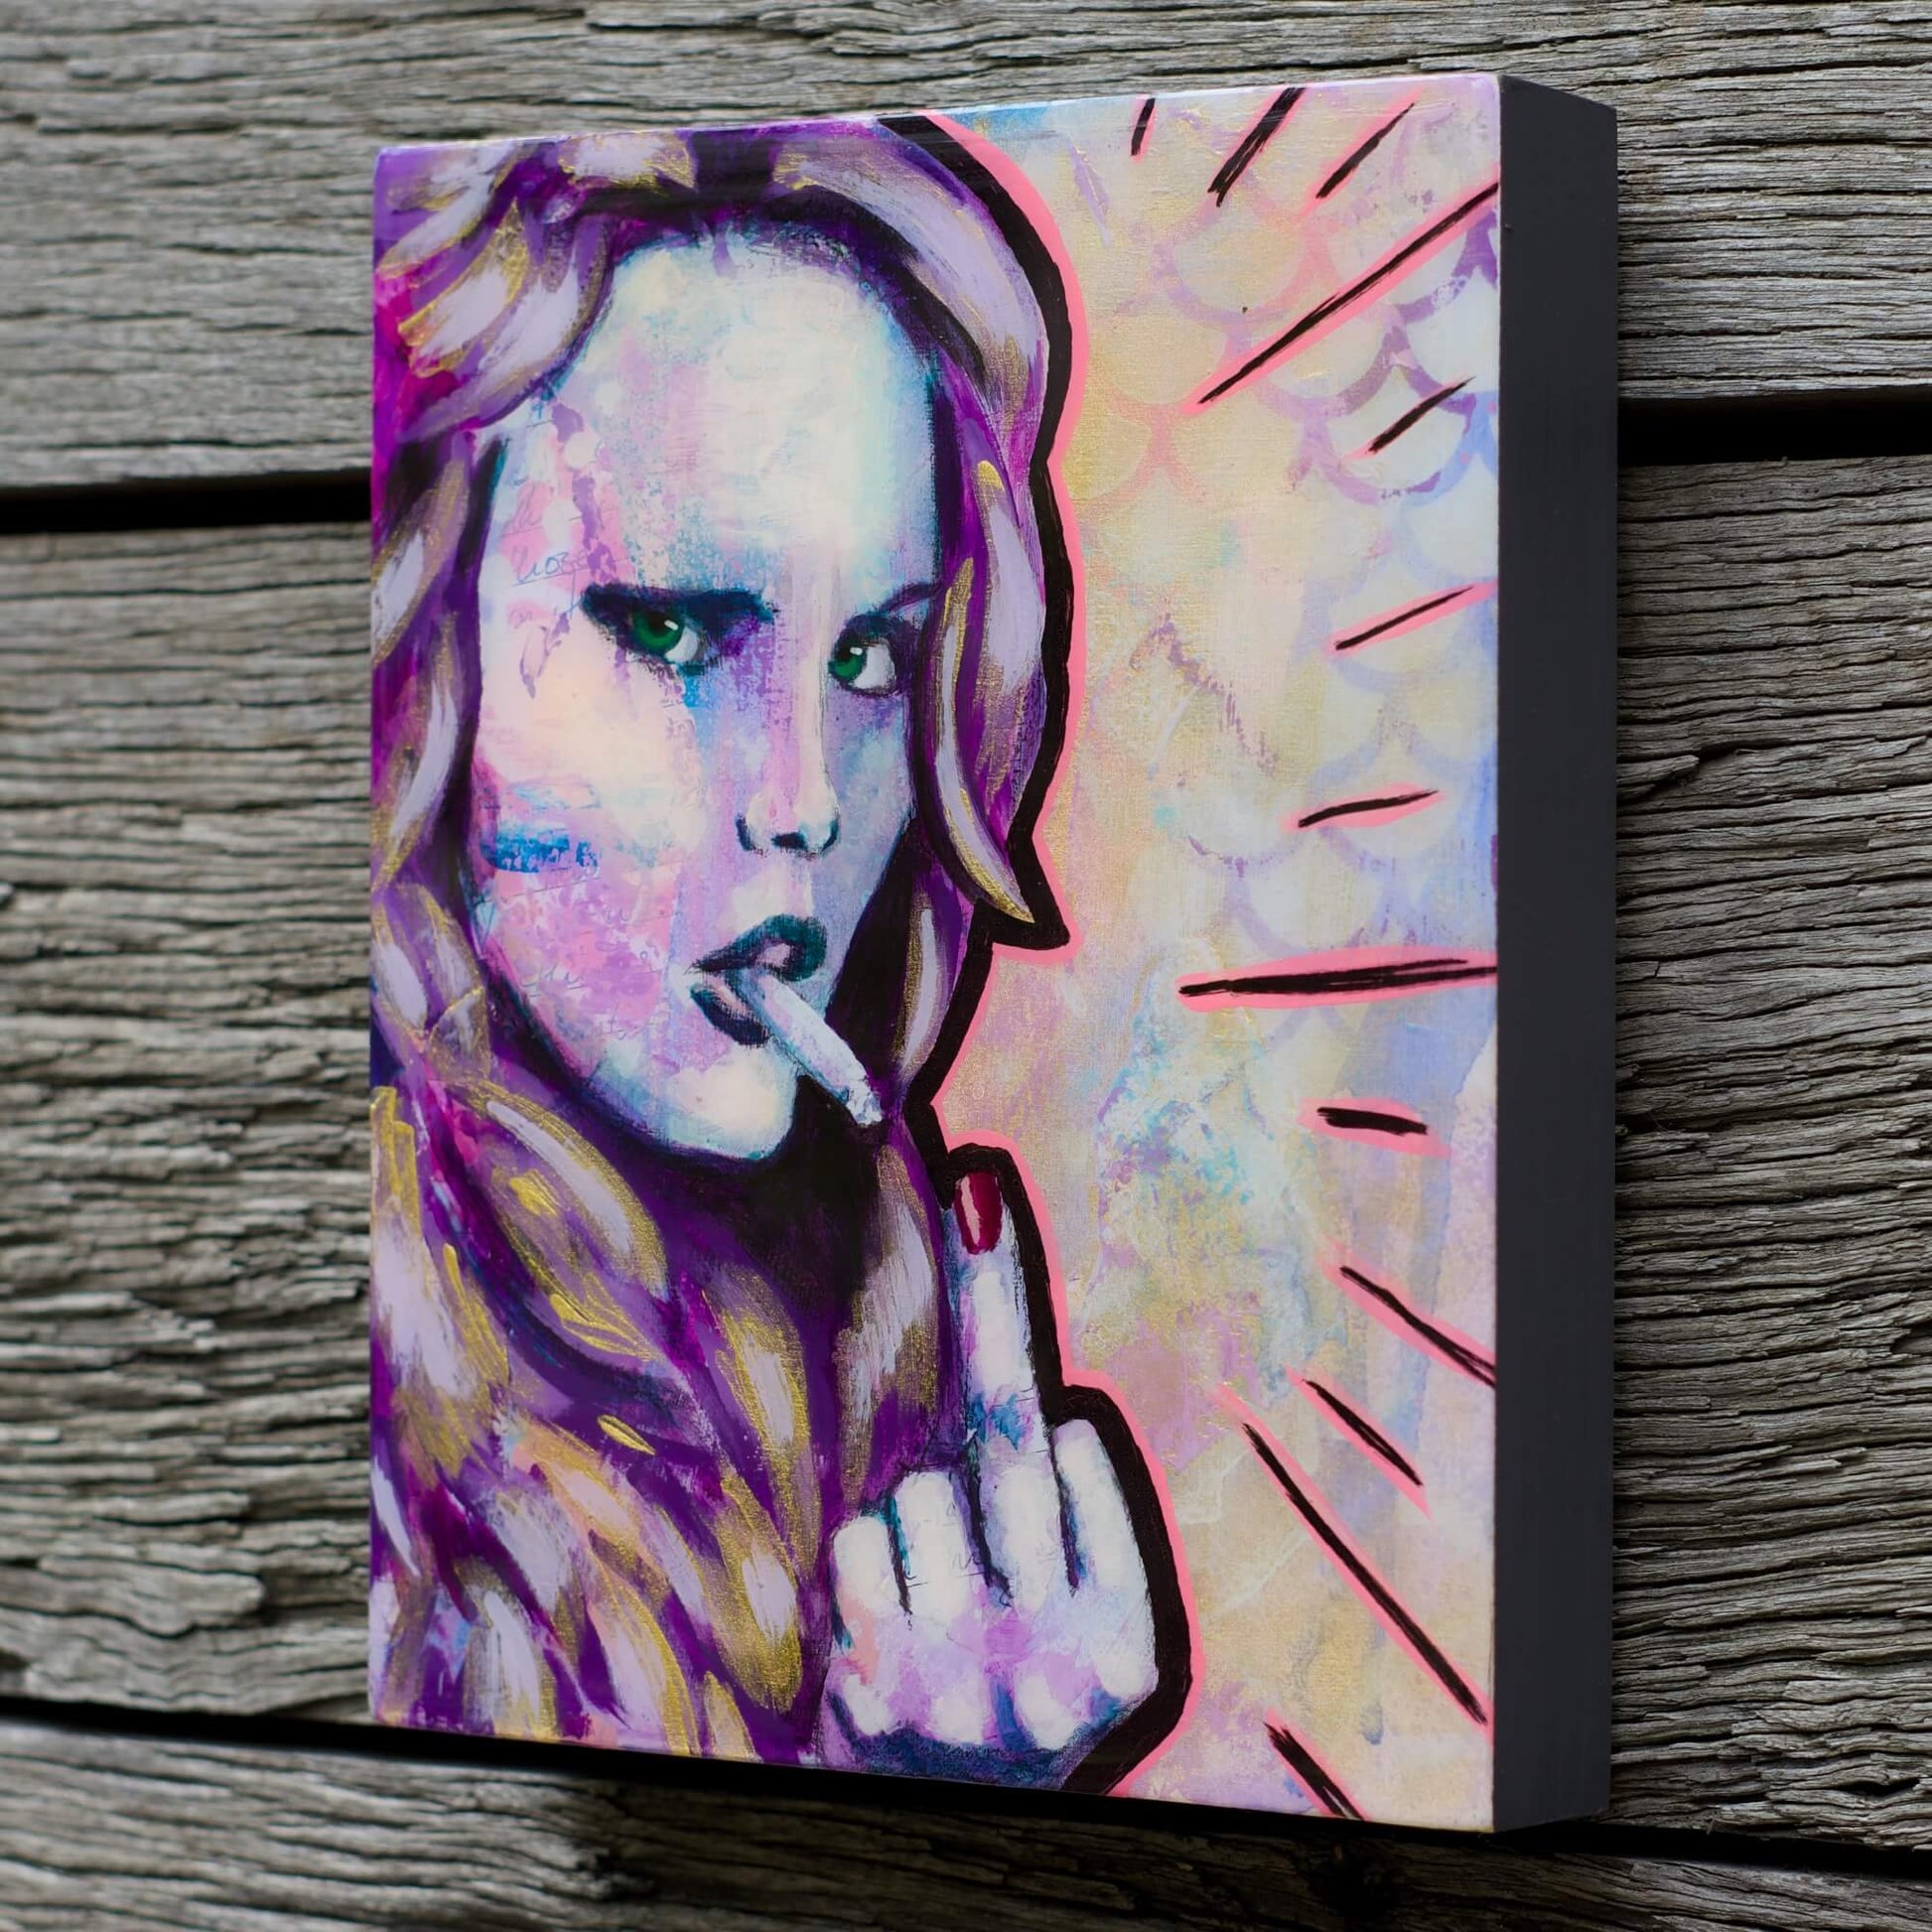 Artwork for Sale – Mini Street Art Style Painting – Pink, Purple & Gold – Mixed Media Art – 'Peggy Sue' – Art Wall Painting Criss Chaney